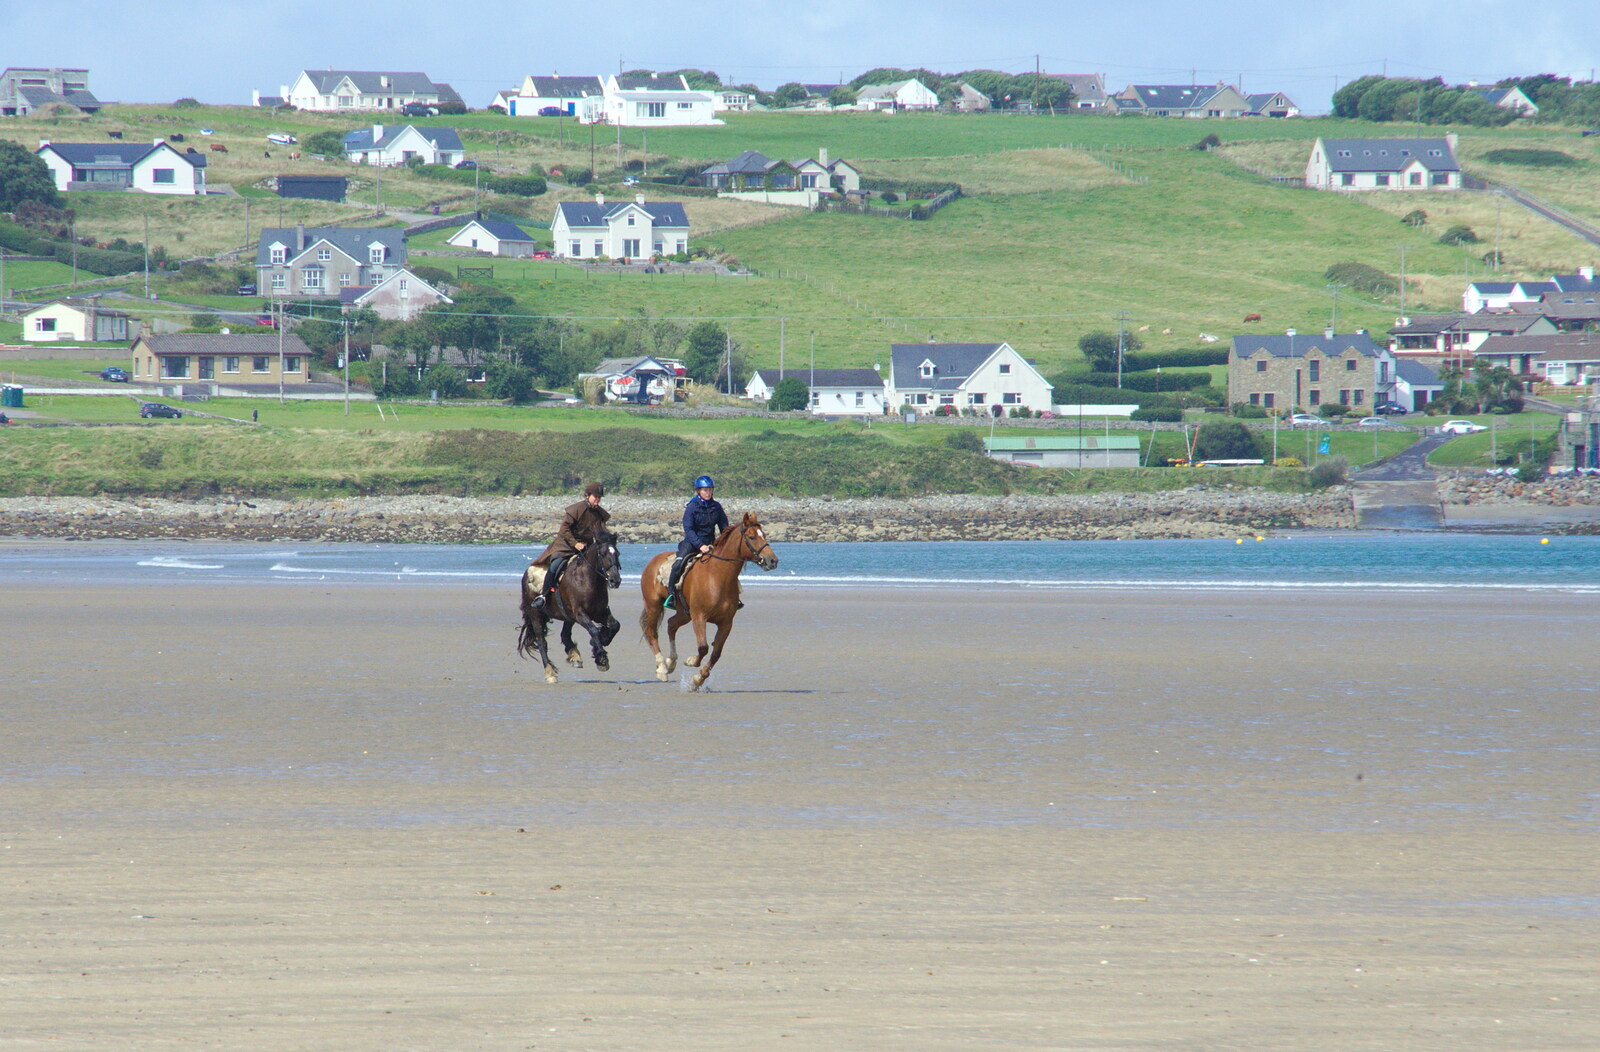 Some horses go out for a gallop from Mullaghmore Beach and Marble Arch Caves, Sligo and Fermanagh, Ireland - 19th August 2019